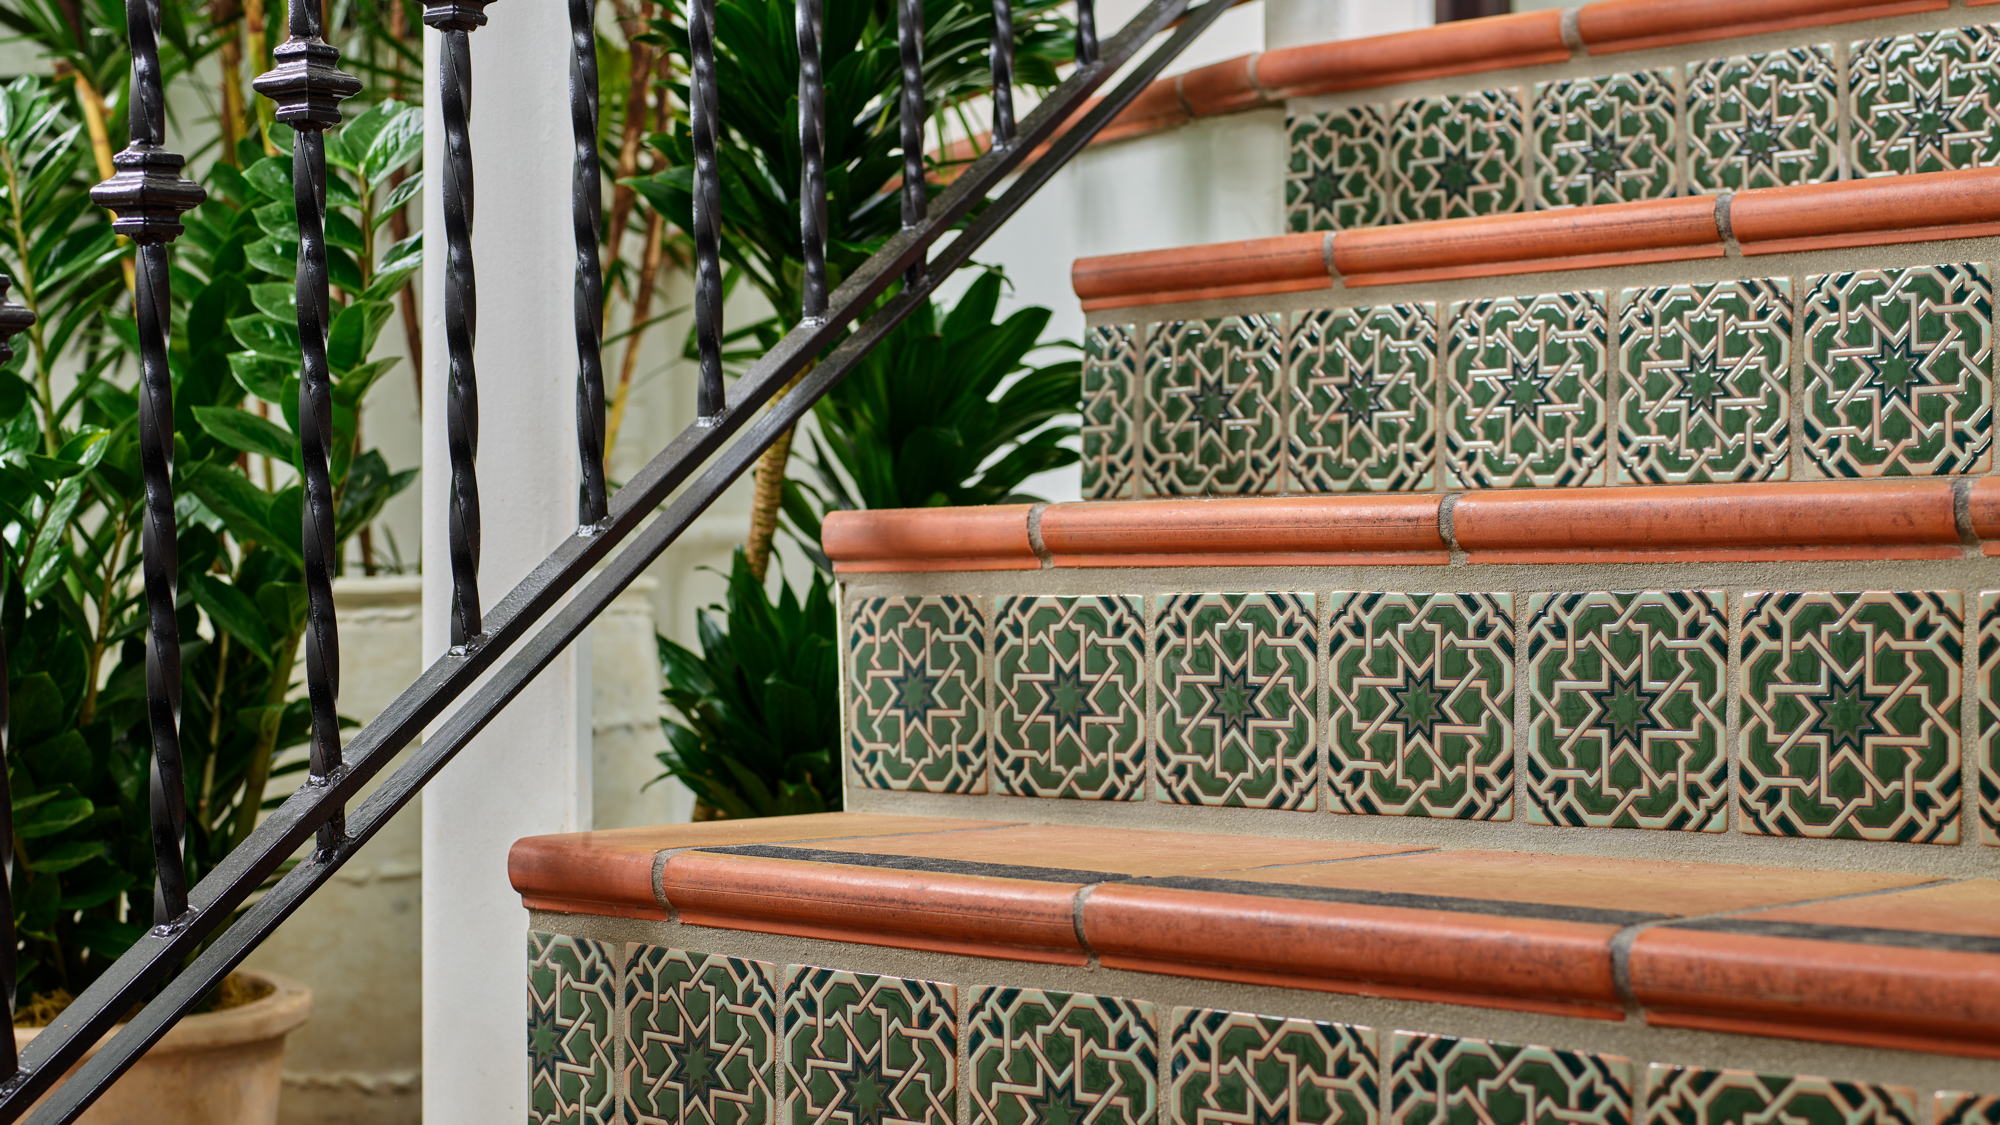 Staircase with dark green and red tiles with black metal railing near plants at Mar Monte Hotel in Santa Barbara, CA